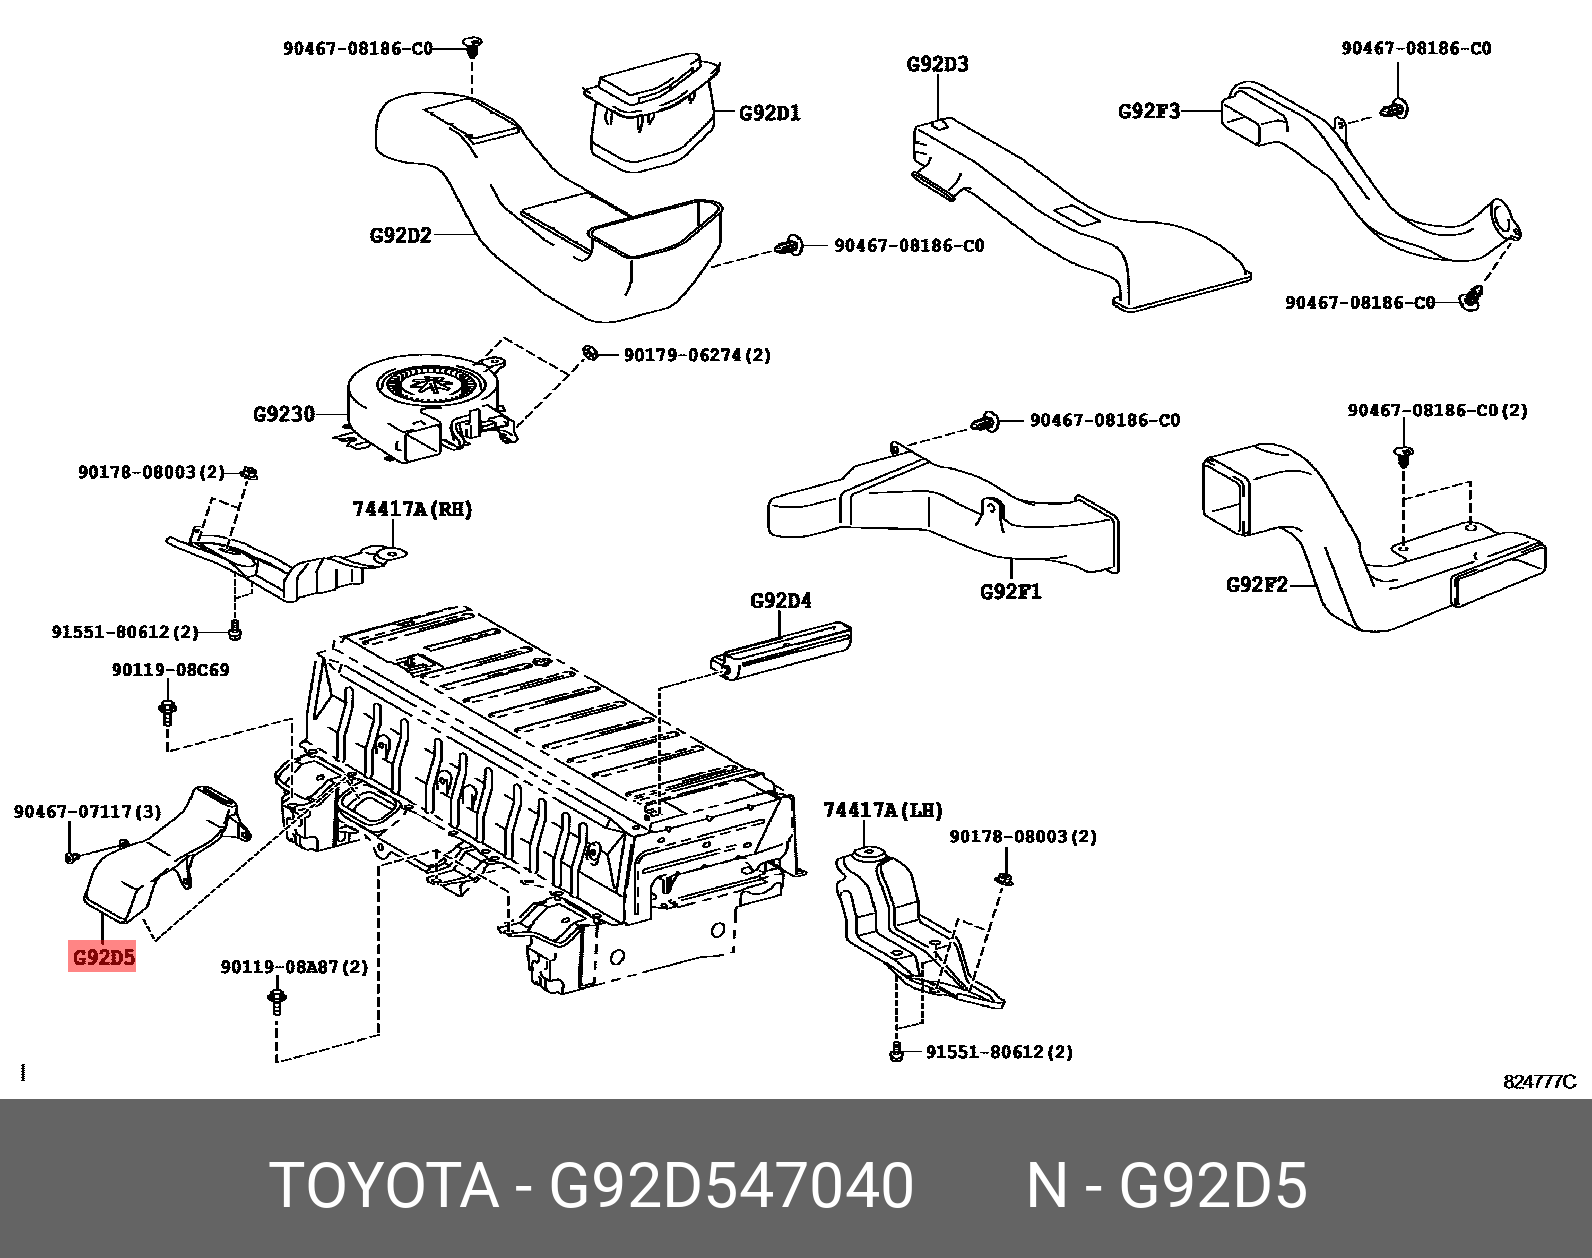 PRIUS (PLUG-IN HBD) 201201 - 201604, DUCT, HYBRID BATTERY INTAKE, NO.5